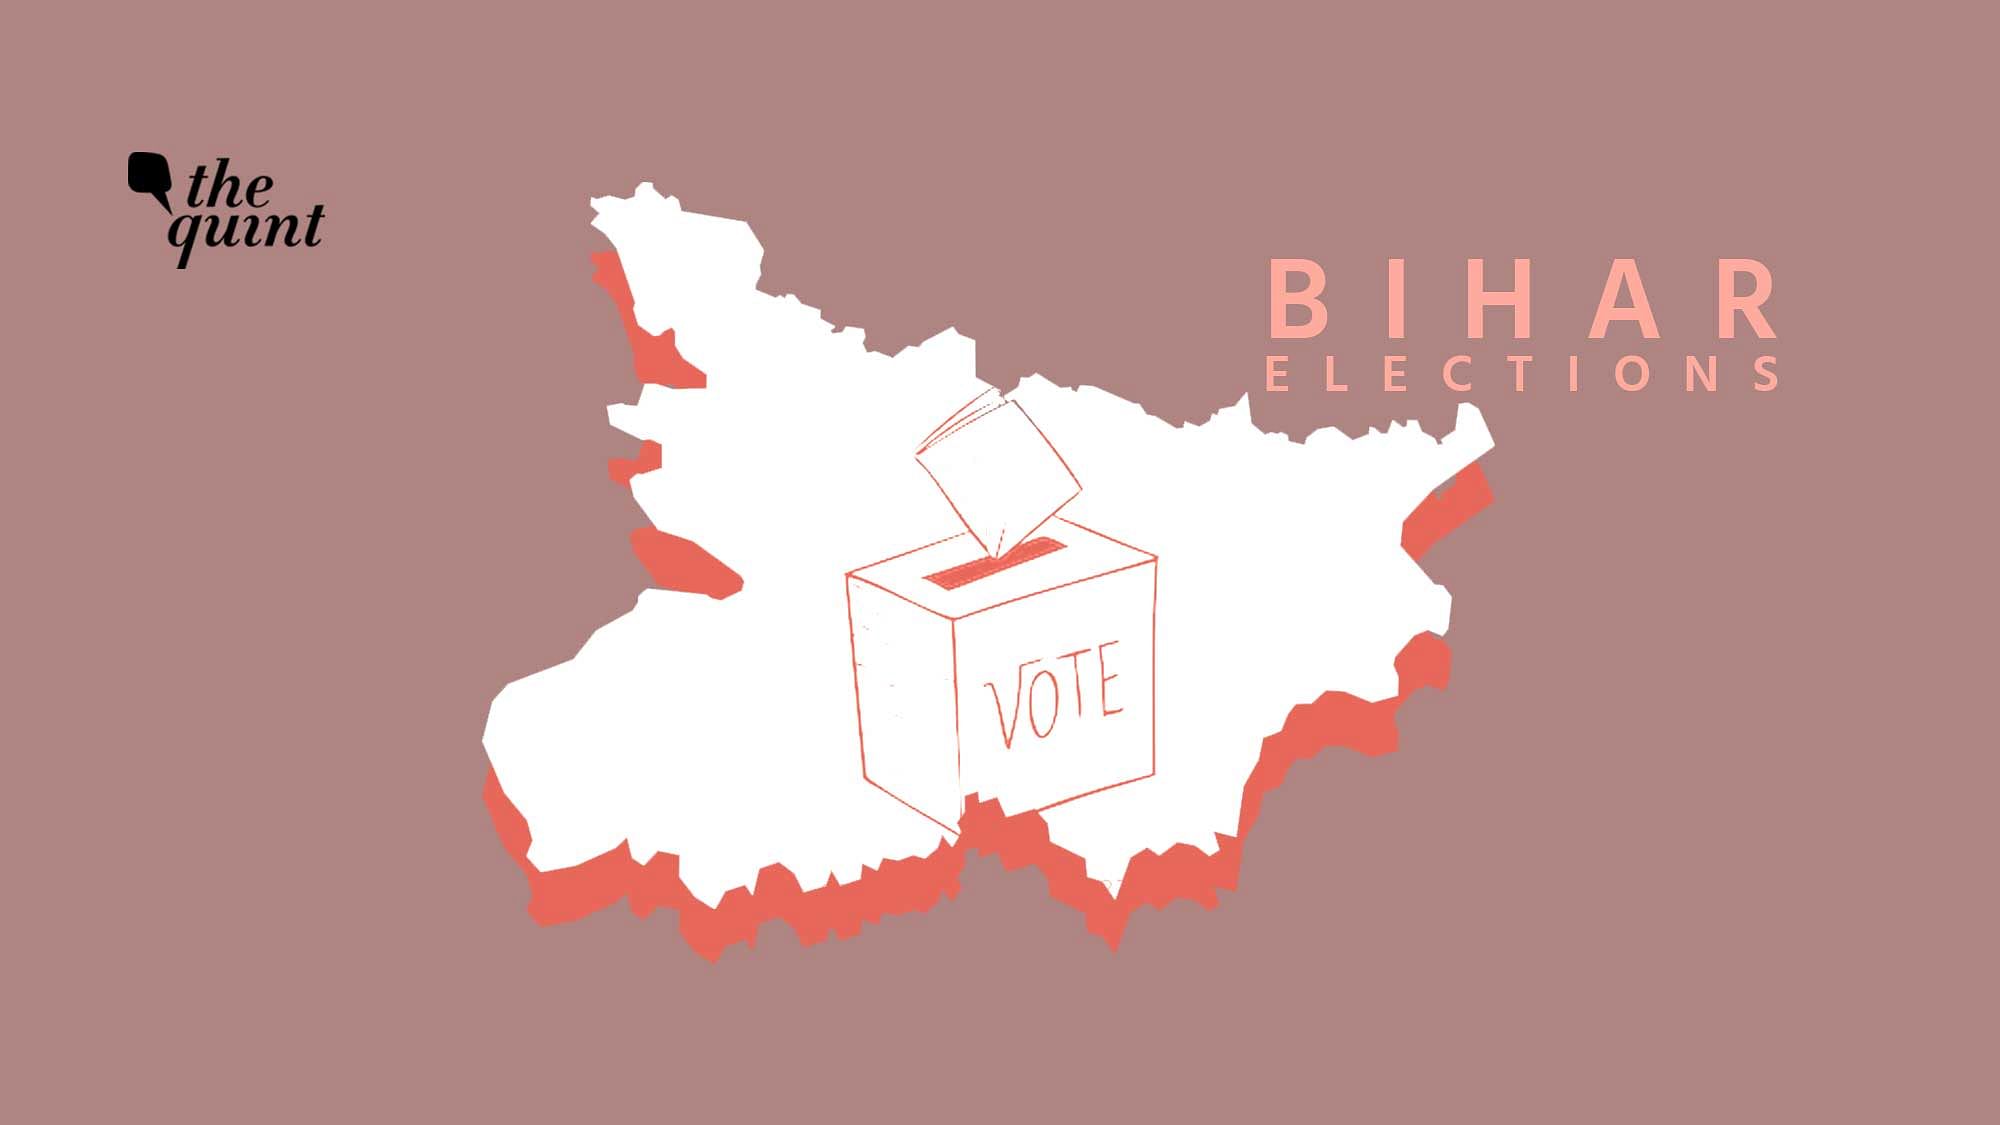 Bihar will vote in the second phase of polling on 3 November.